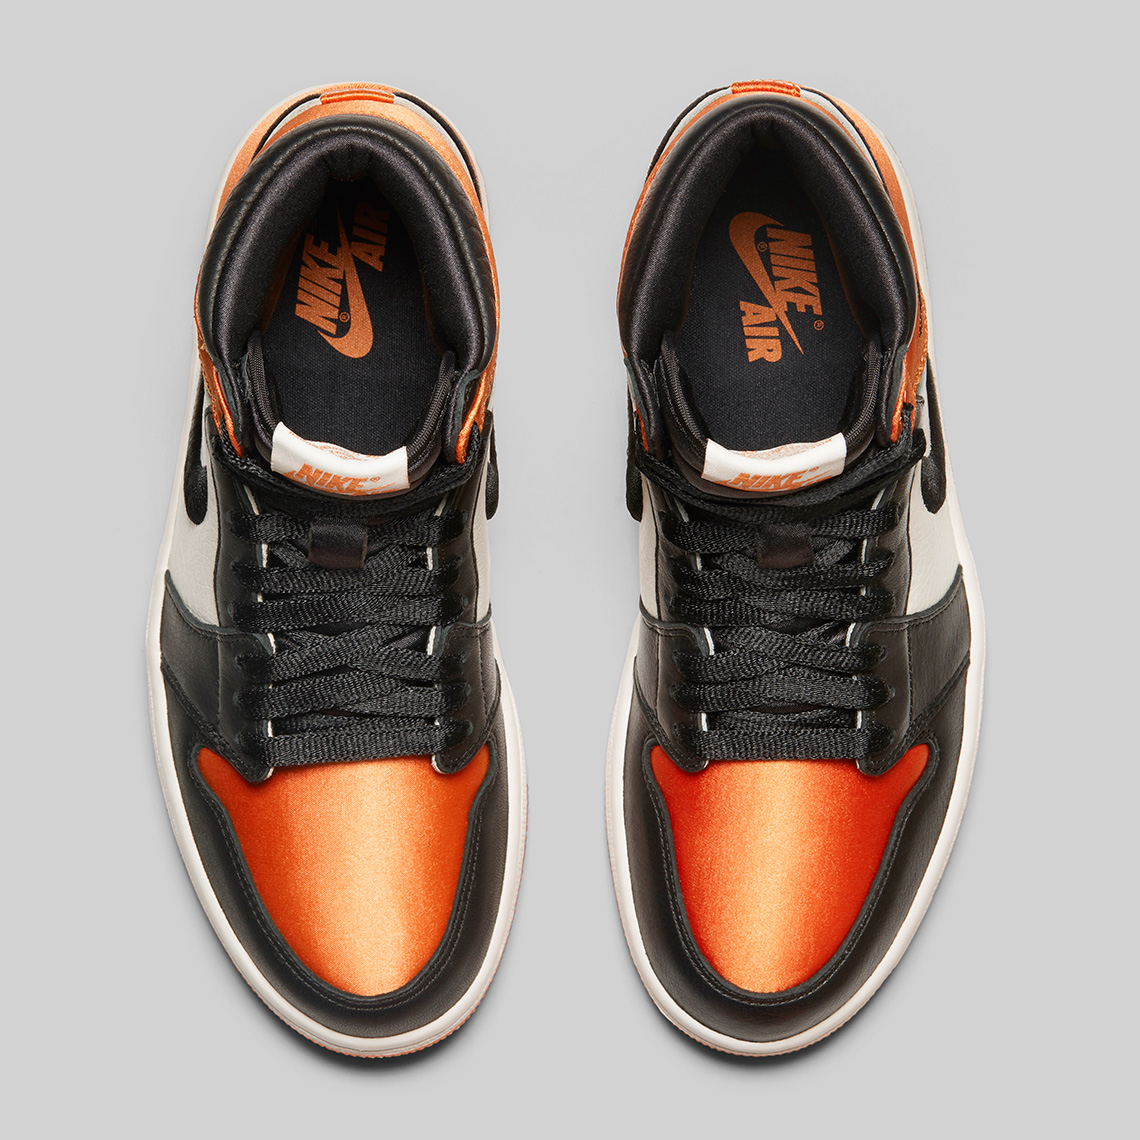 Attention Satin Shattered 1's Is In Lane -